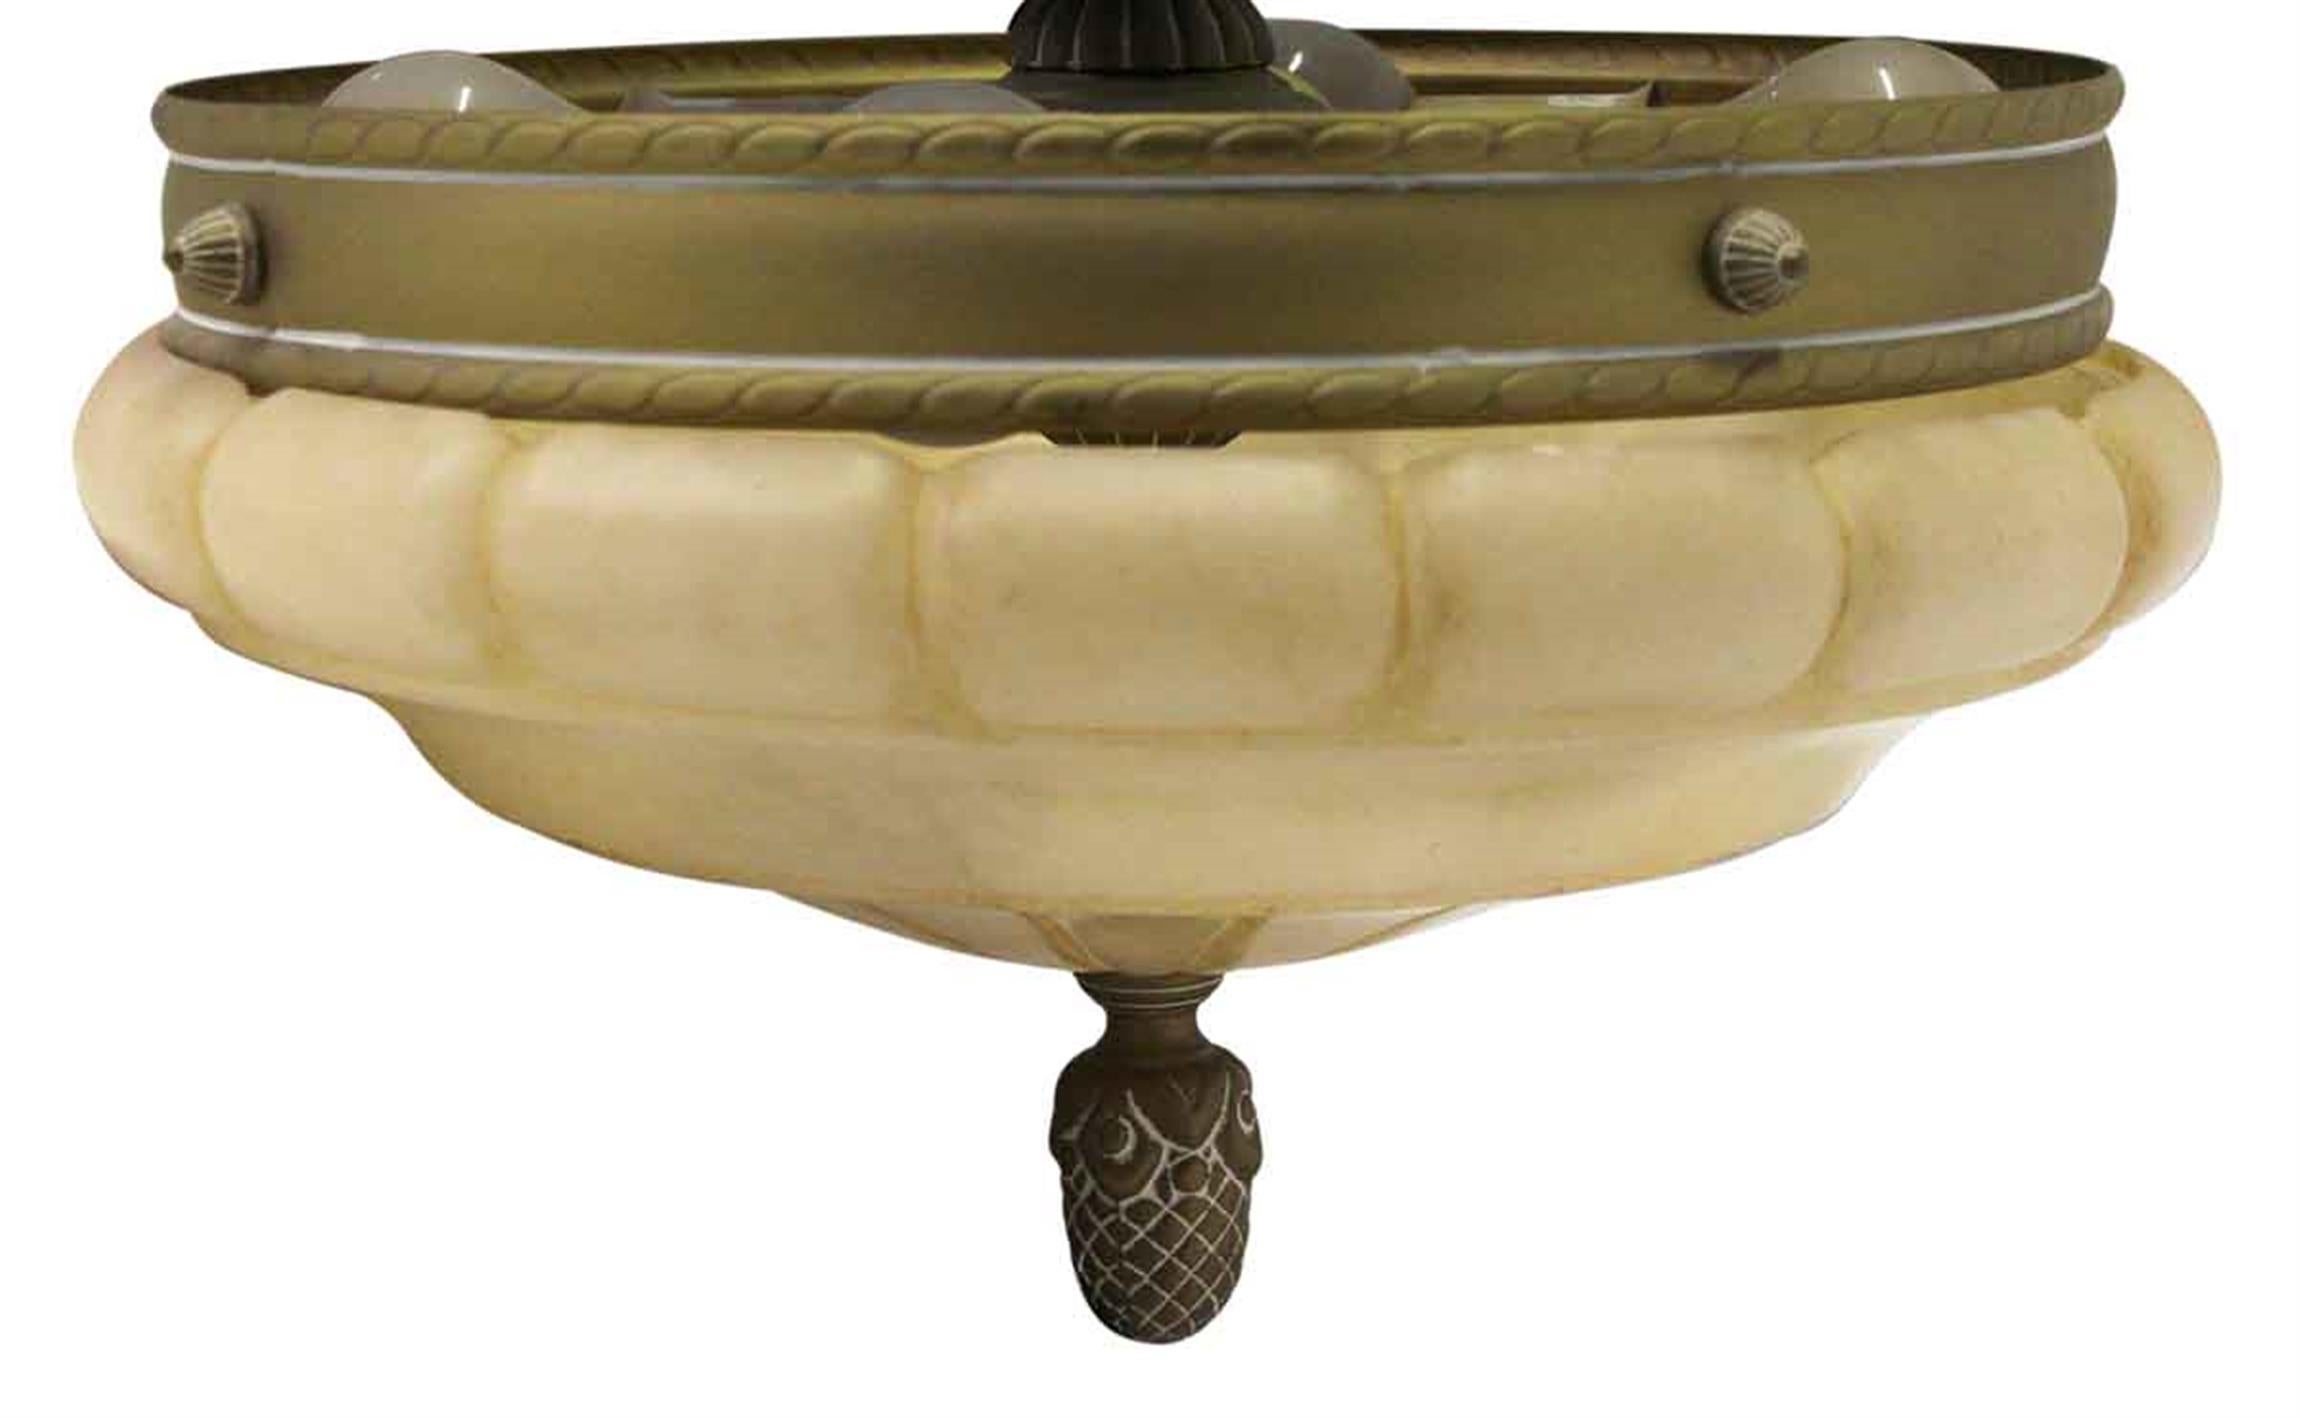 Large 1980s alabaster semi flush mount dish ceiling light with brass details and a pineapple finial. From the NYC Waldorf Astoria Hotel. Please allow two weeks for rewiring and cleaning. Waldorf Astoria authenticity card included with your purchase.